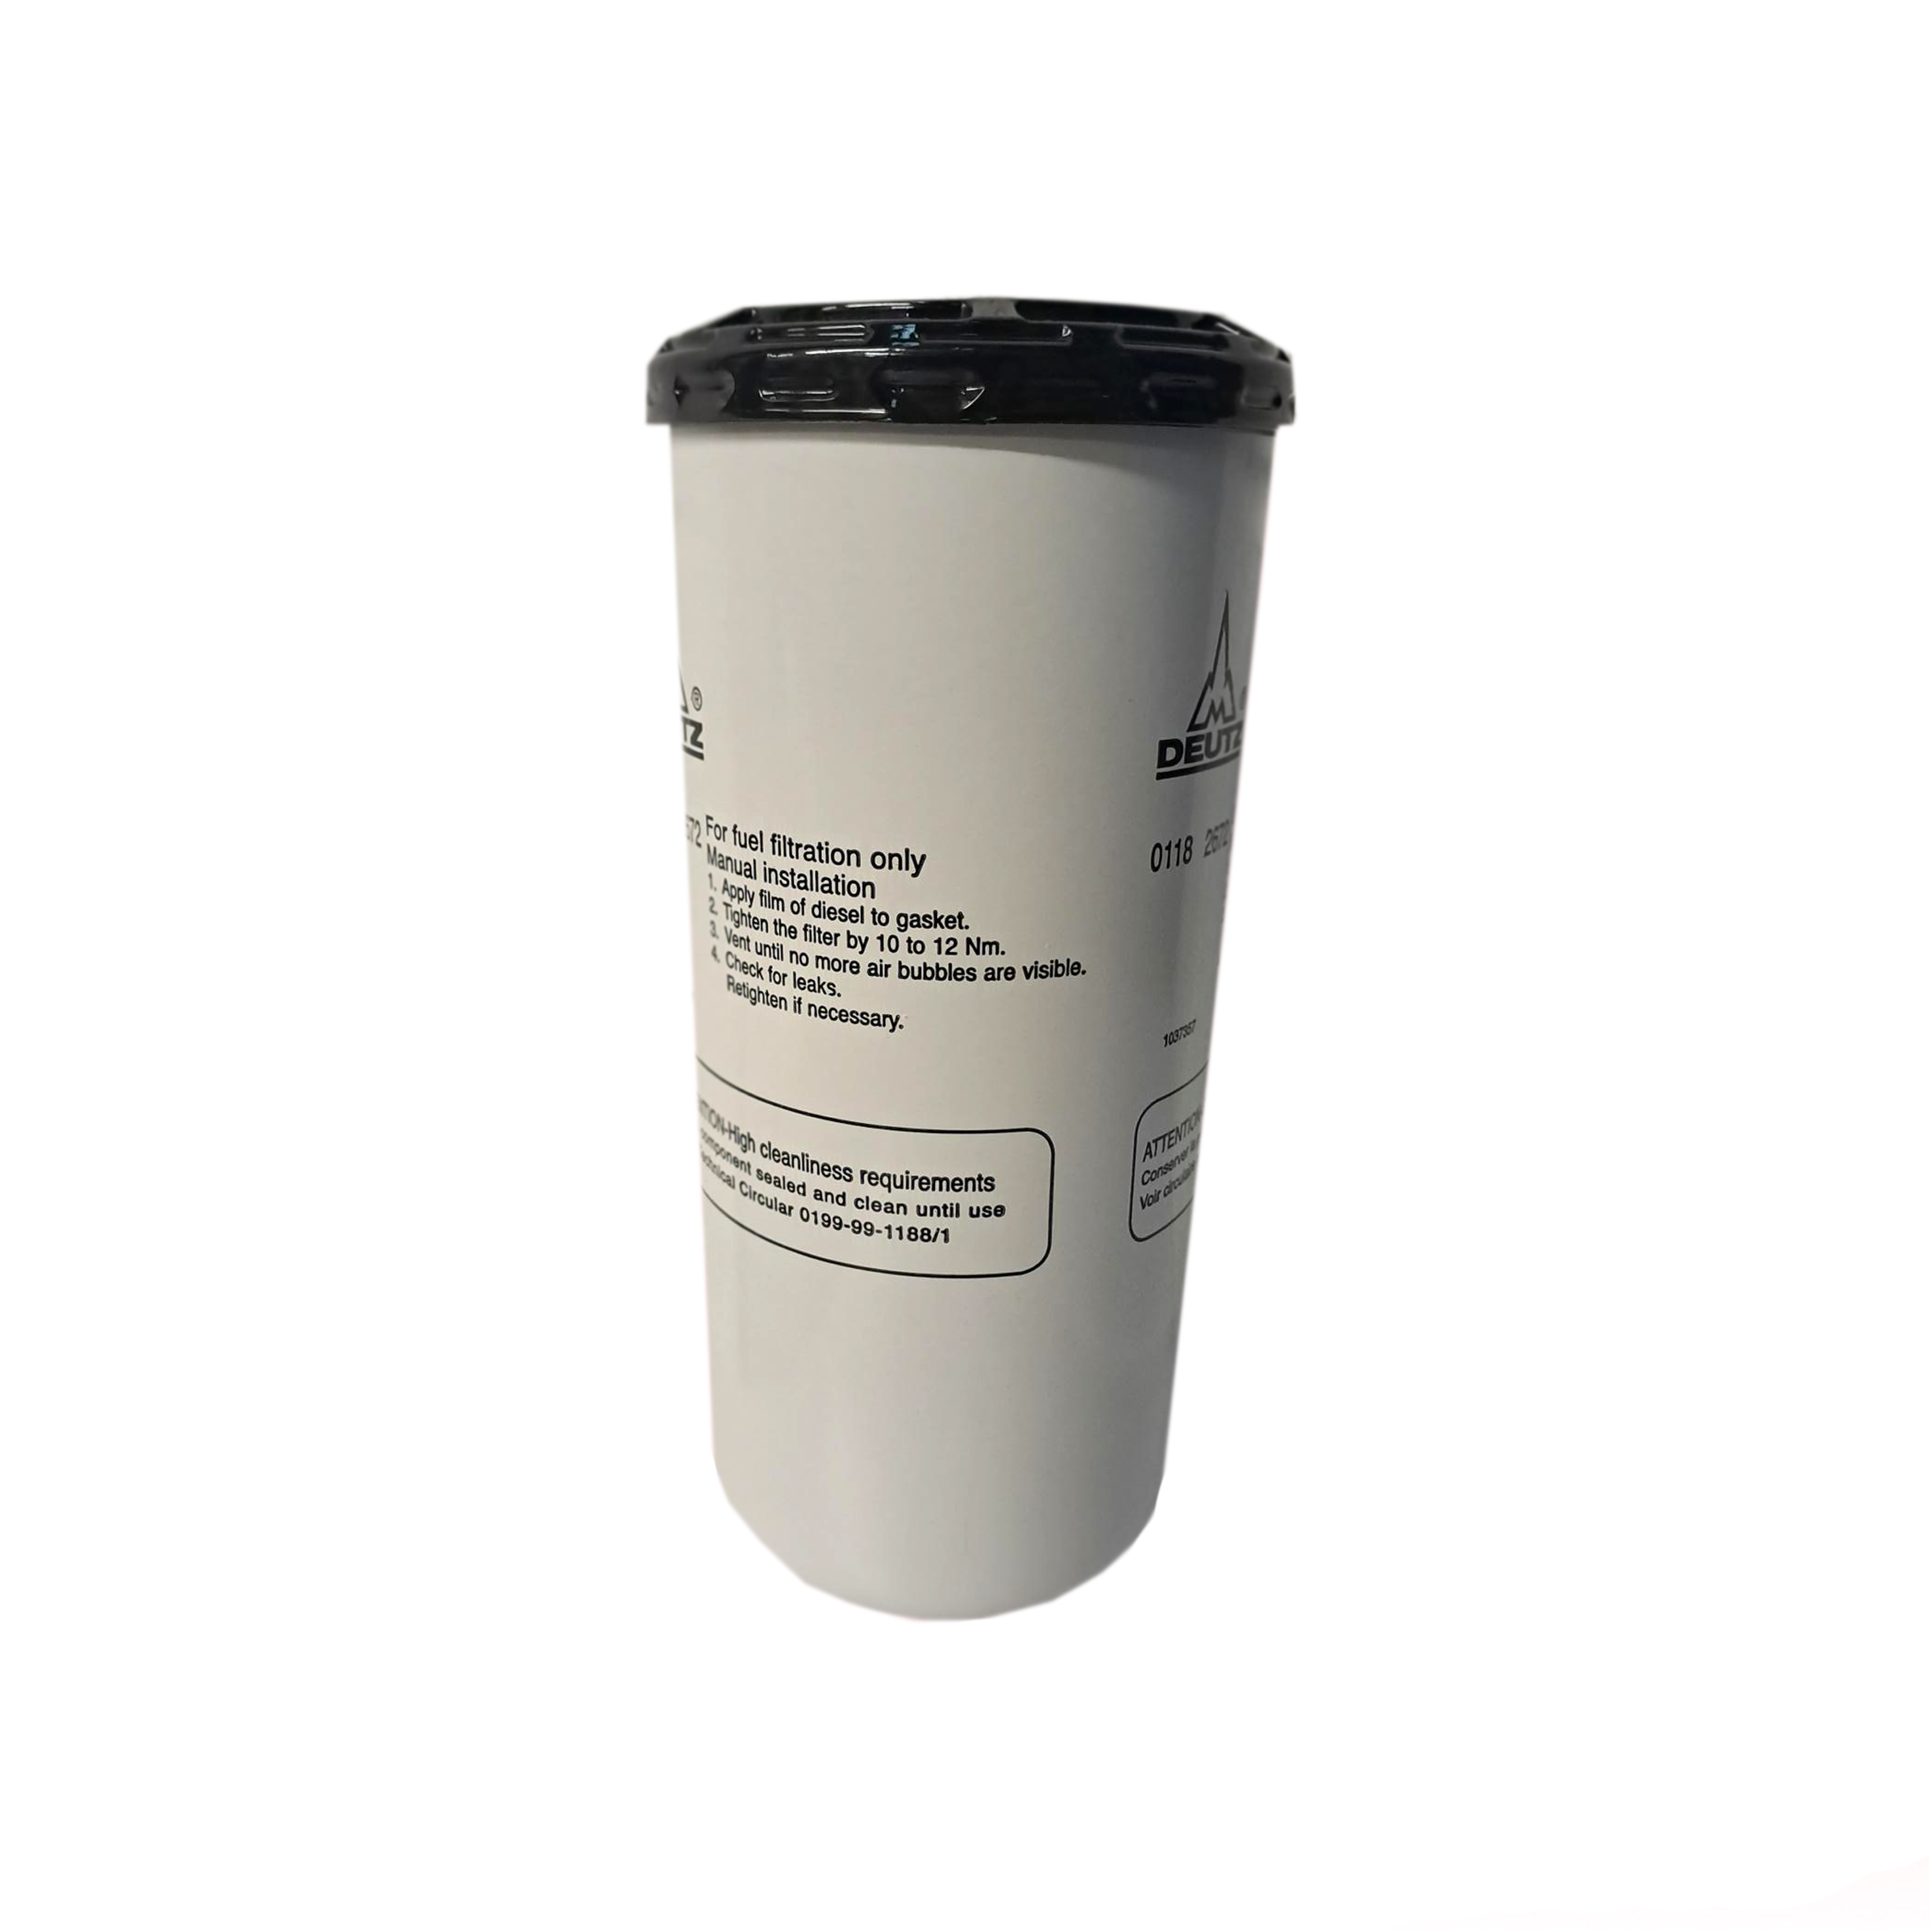 Secondary Fuel Filter fits Atlas 350MH / Weycor 640 , 660 & 680 Series